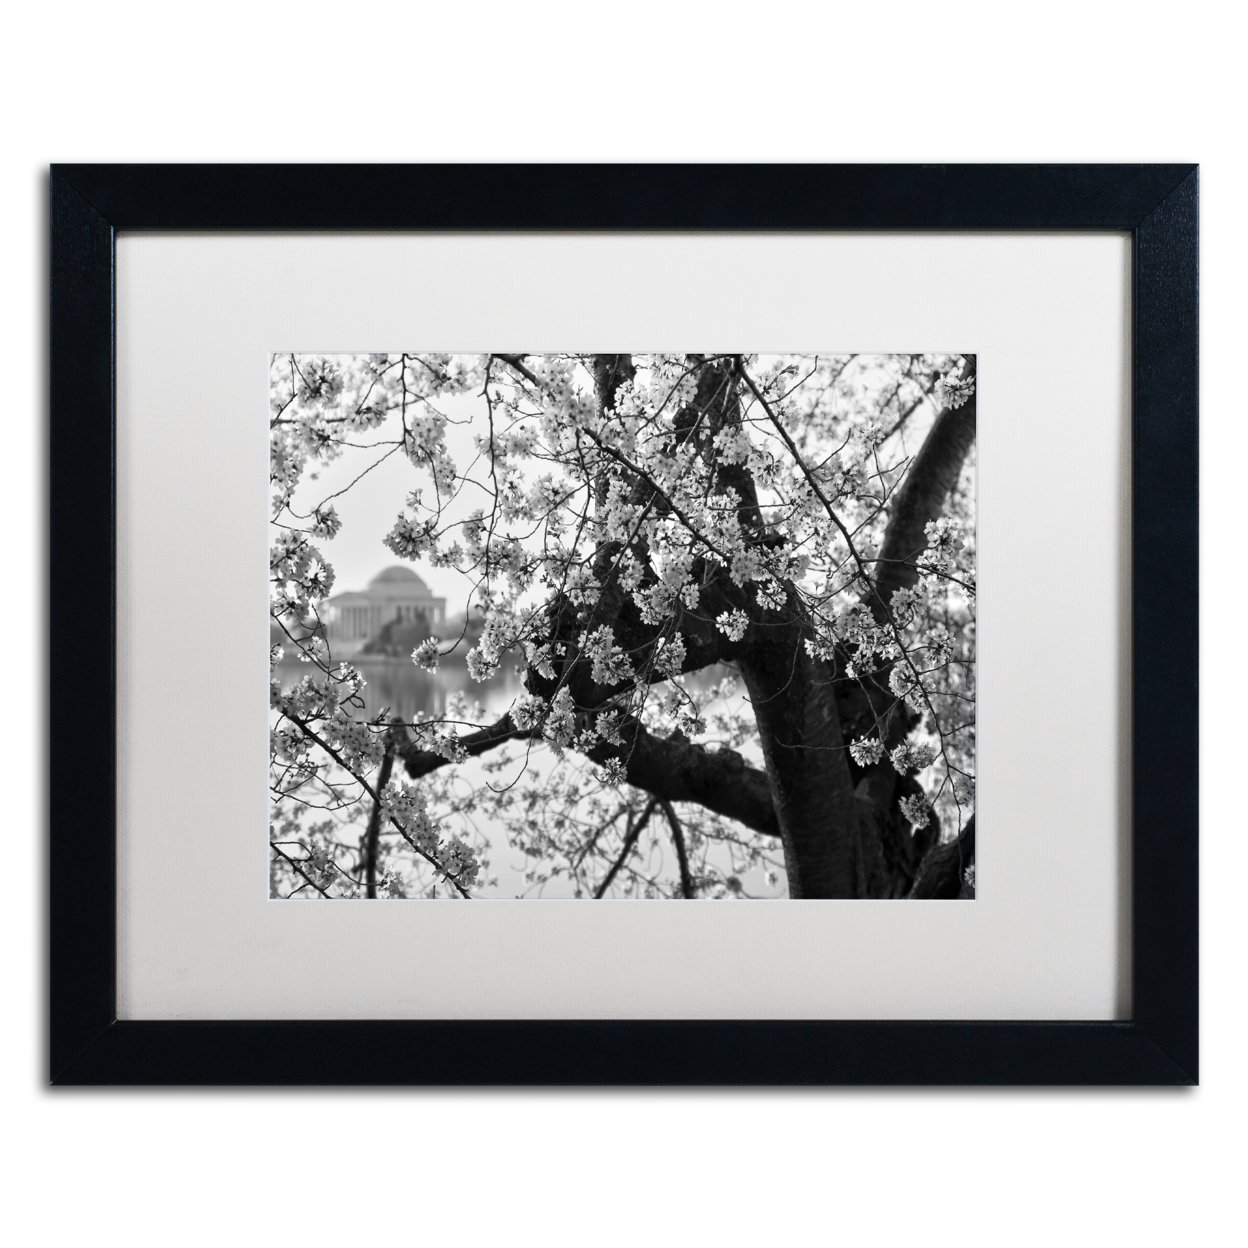 CATeyes 'Blossoms BW' Black Wooden Framed Art 18 X 22 Inches